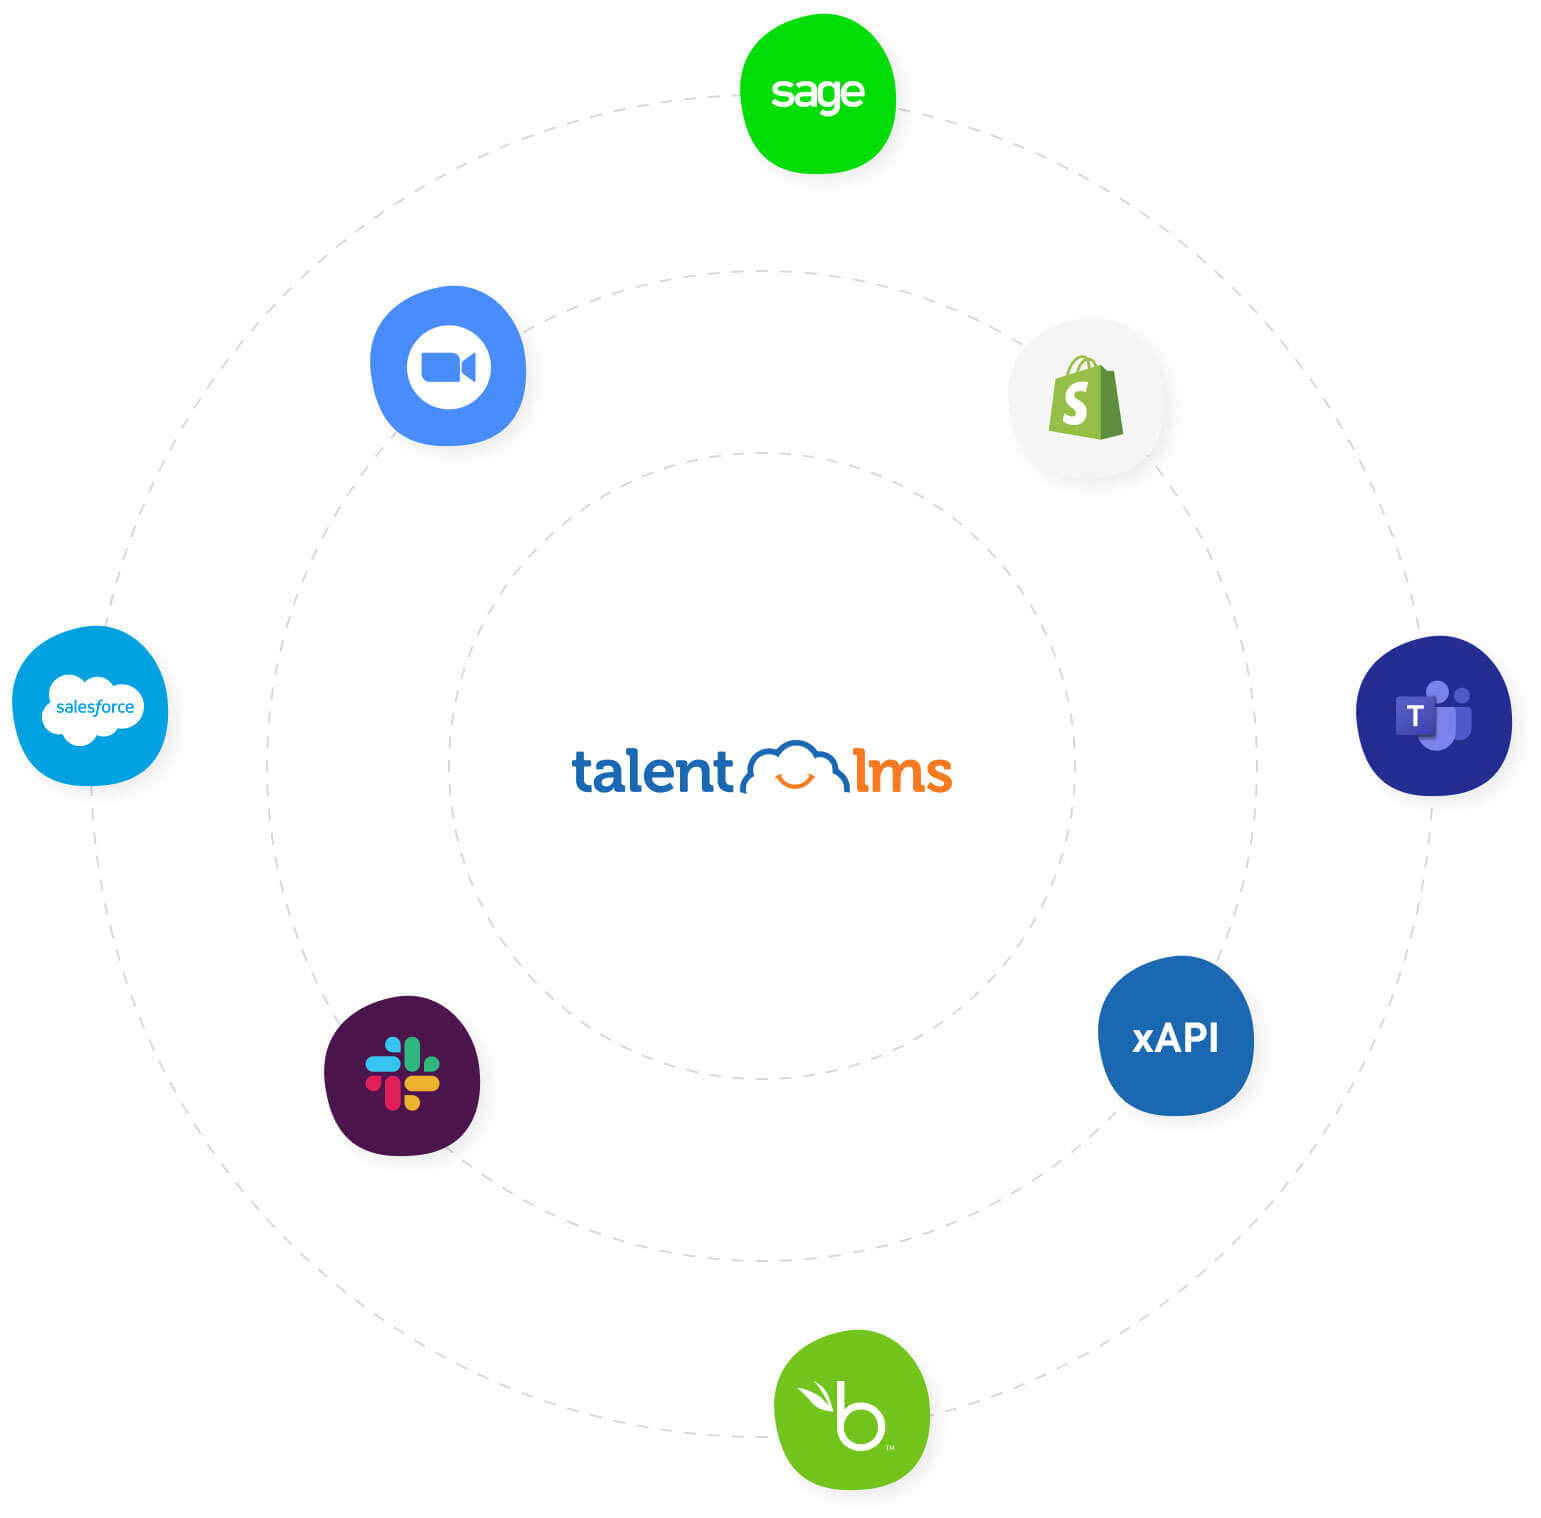 Take a look at the technlogies that TalentLMS has partenered up with.